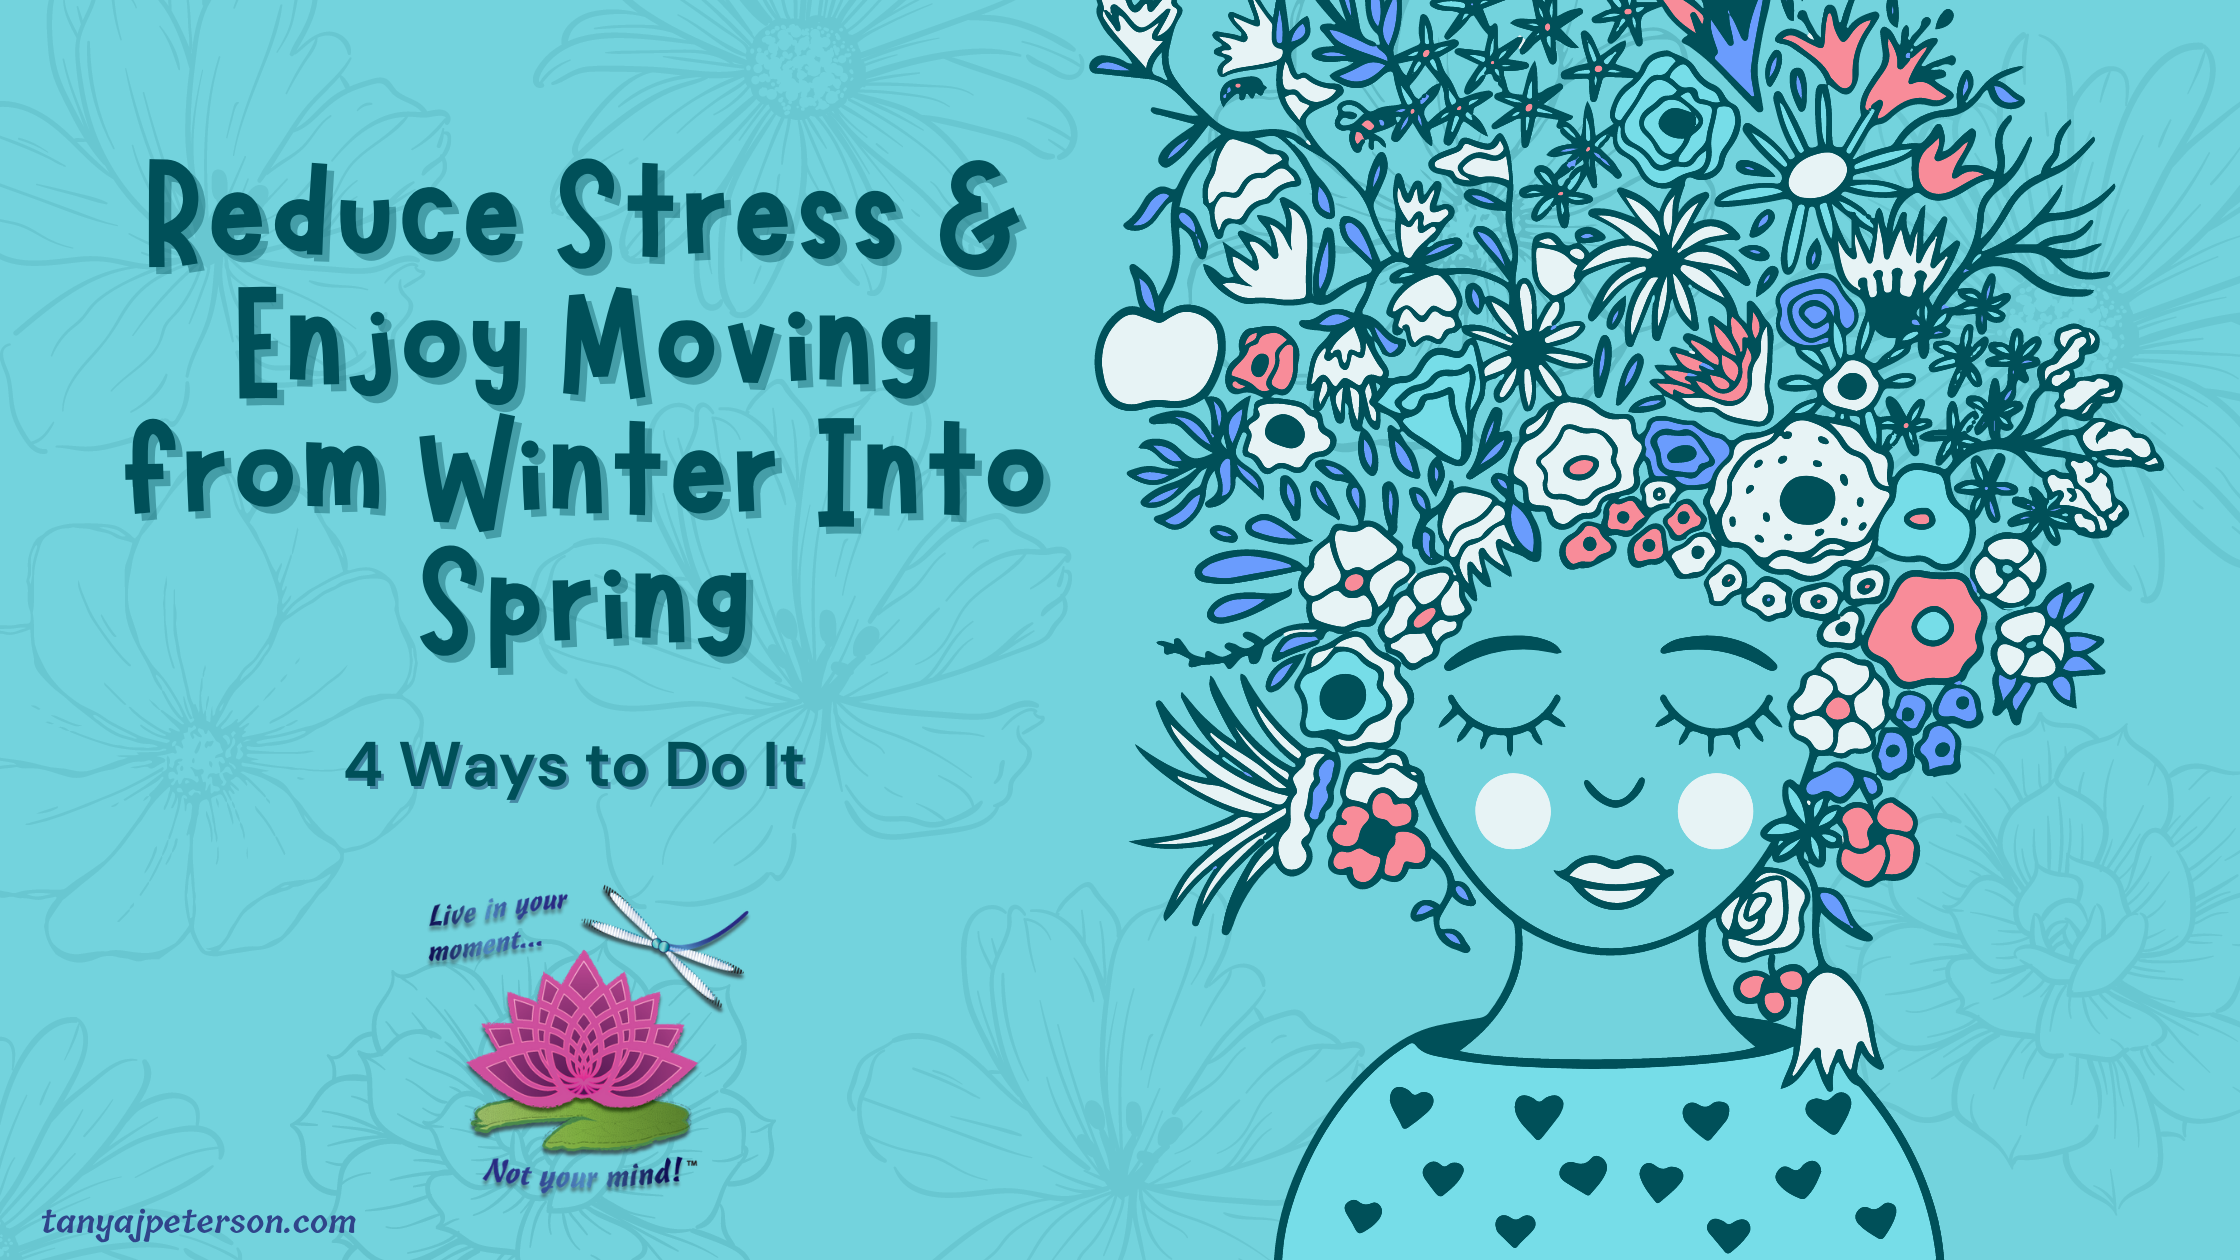 Spring is a time of transition and change, and as such can be stressful. Learn 4 ways to reduce stress when transitioning to spring.